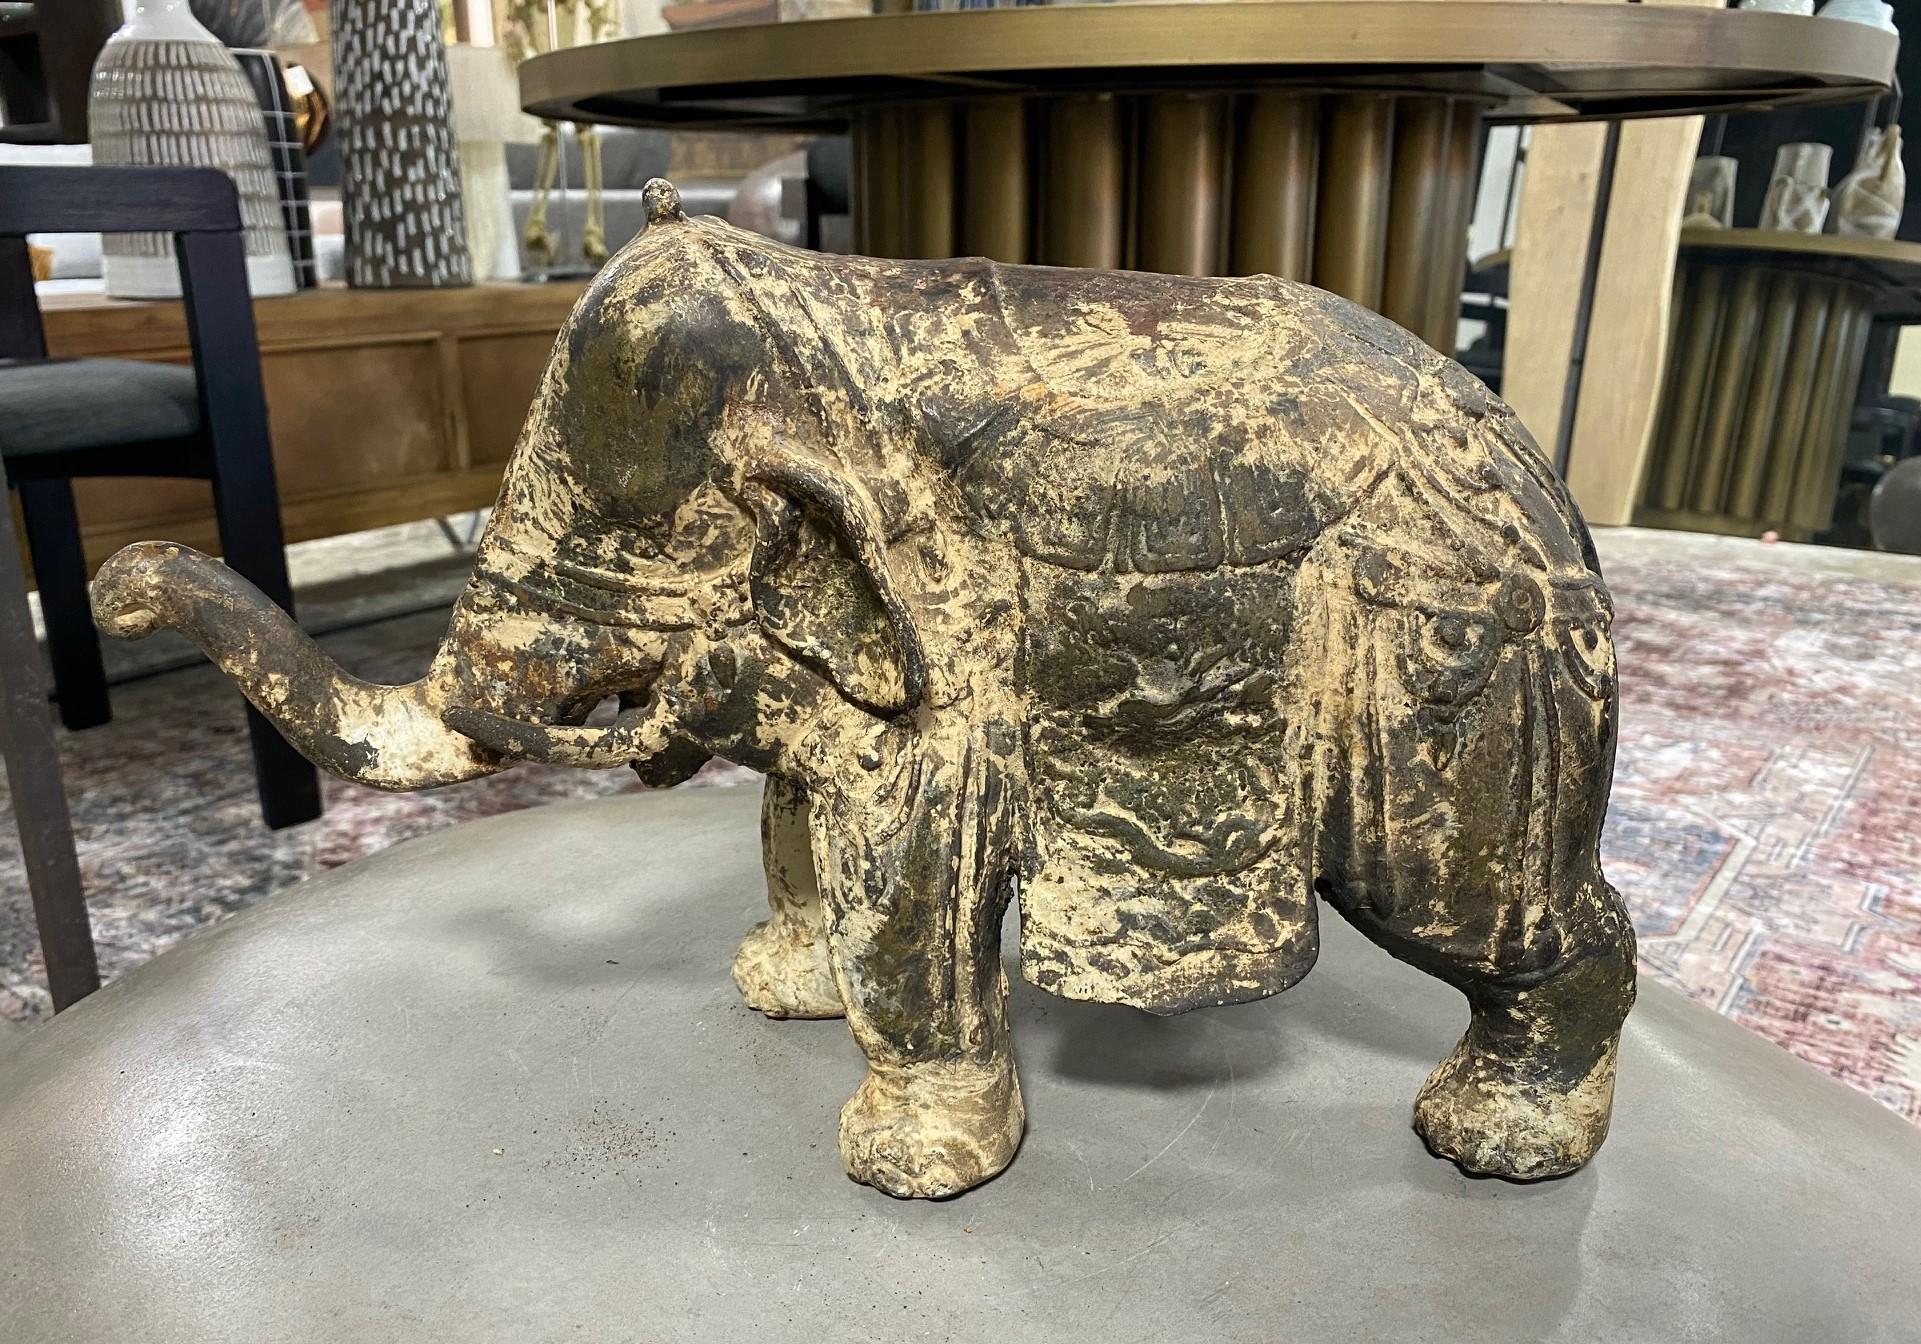 A very eye-catching and wonderful work. A bit of a designer's dream accent piece. Heavy and solid with a rich, aged patina.

We have seen only one other like it which was said to have been acquired in Japan and dated from the mid-1800s. 

Would